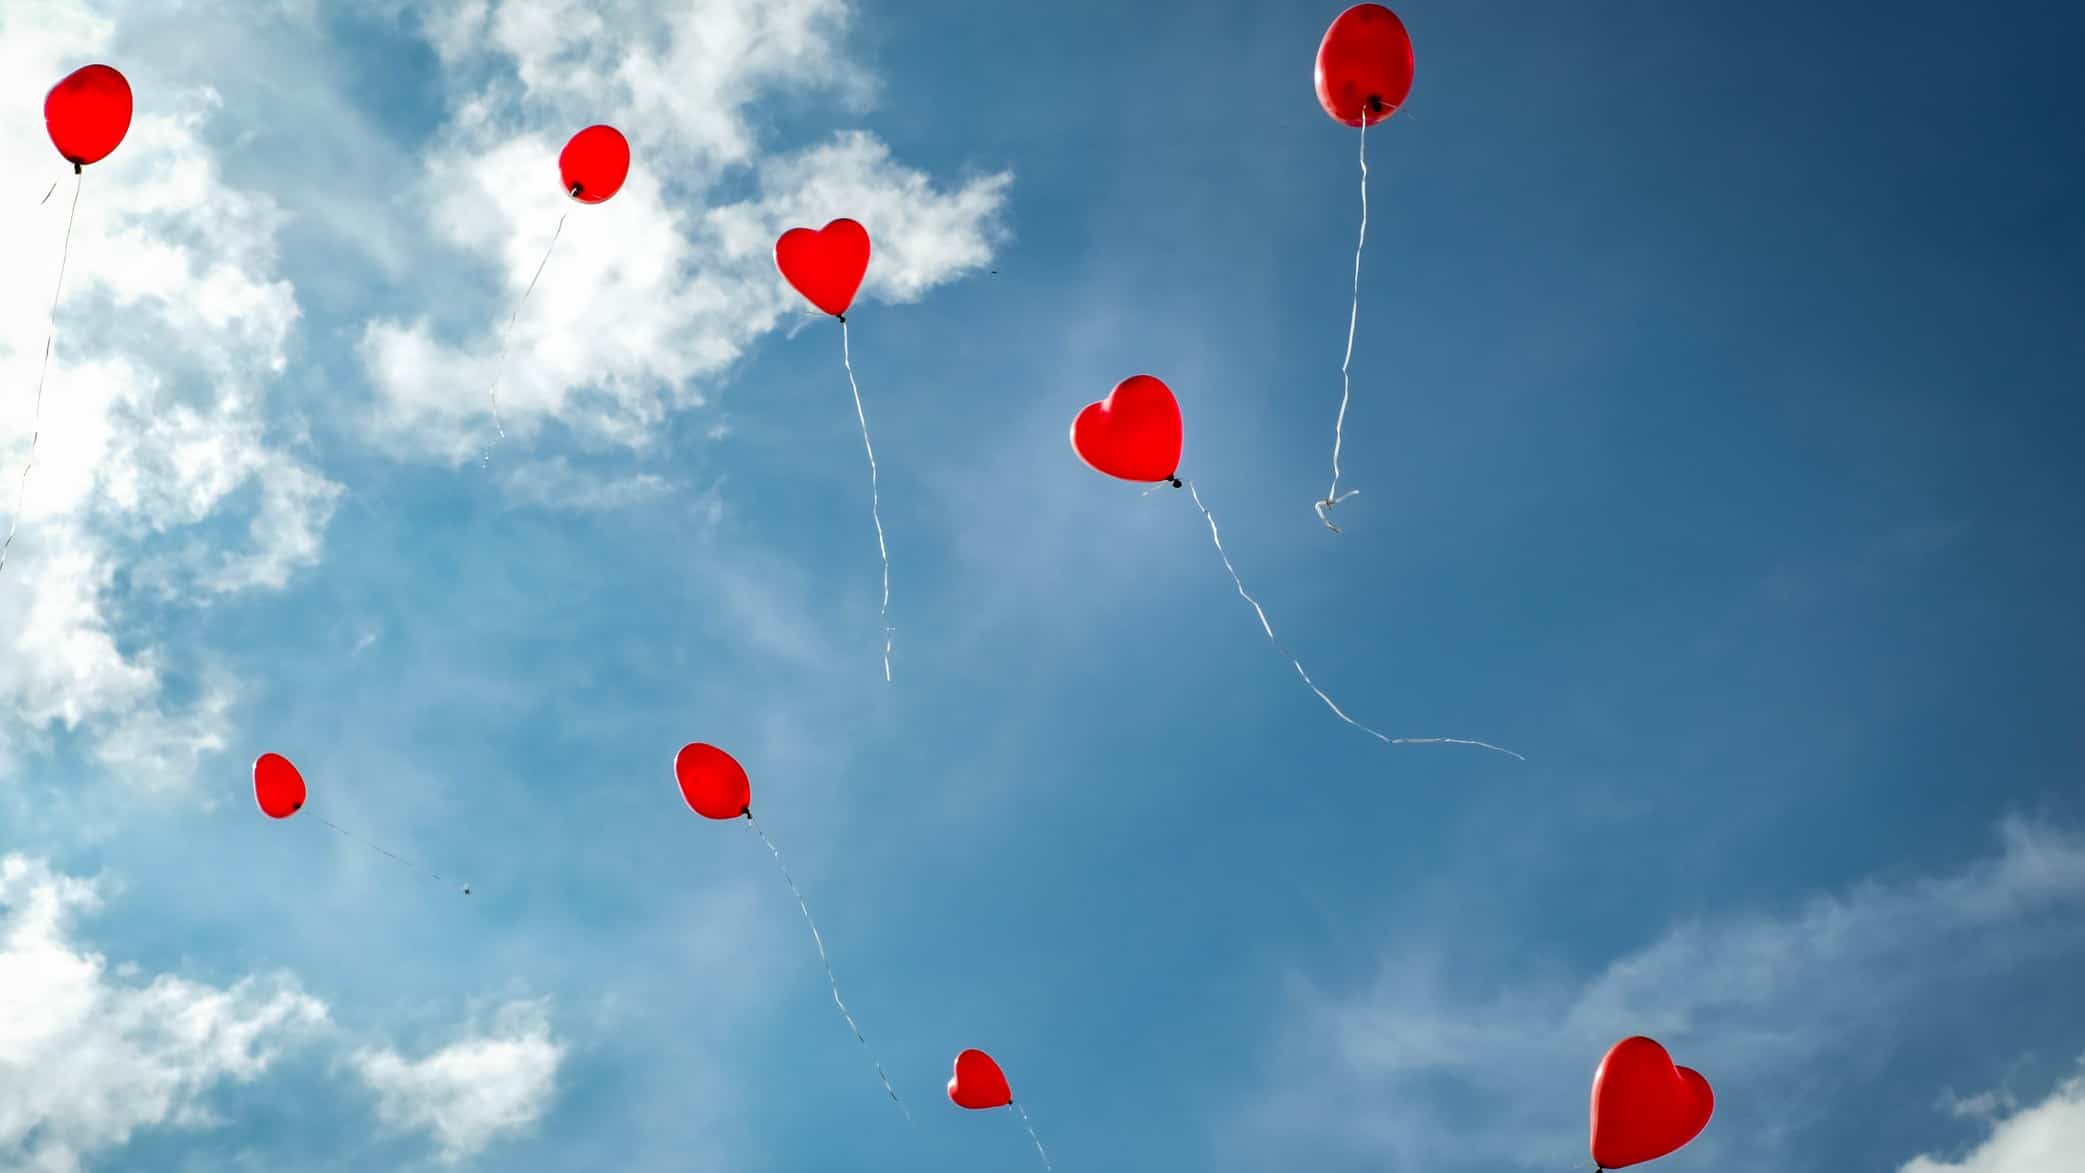 heart shaped balloons flying in the air representing Cardiex share price